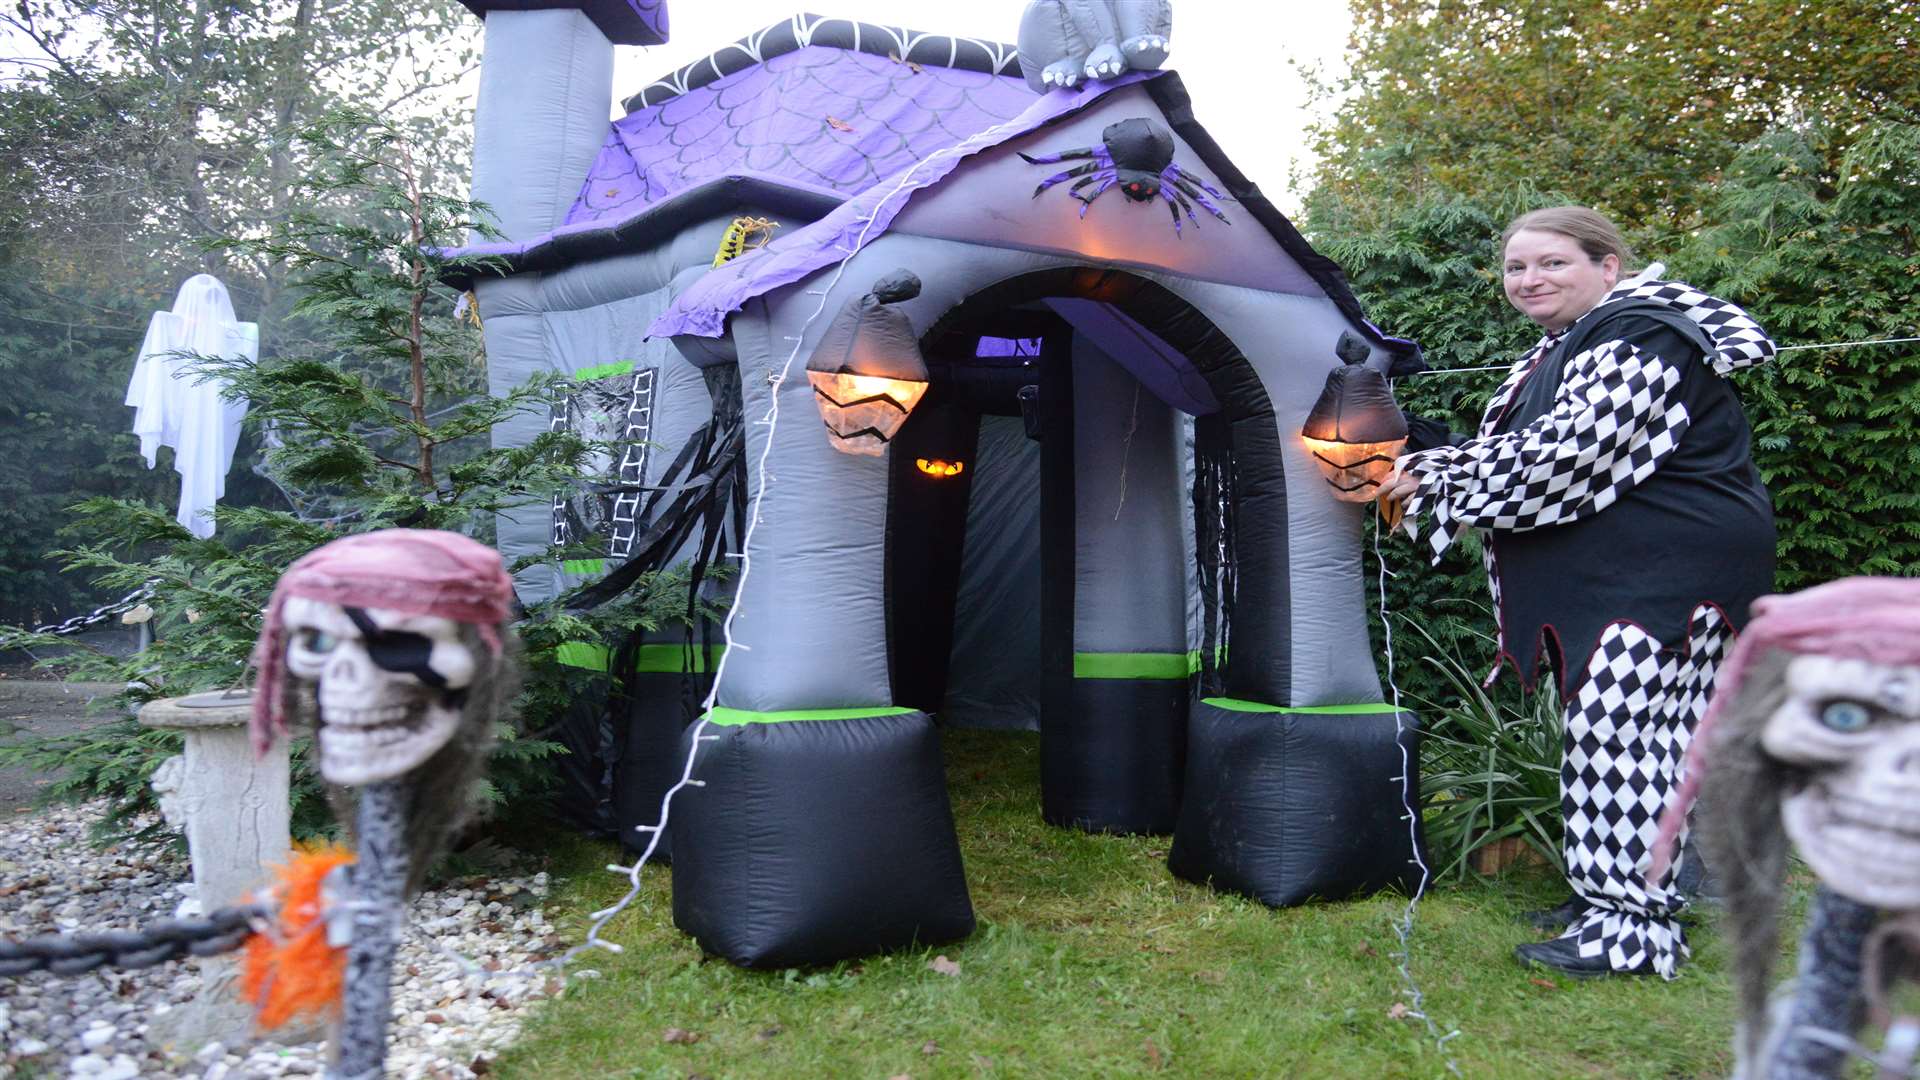 Linda at her spooky Halloween house